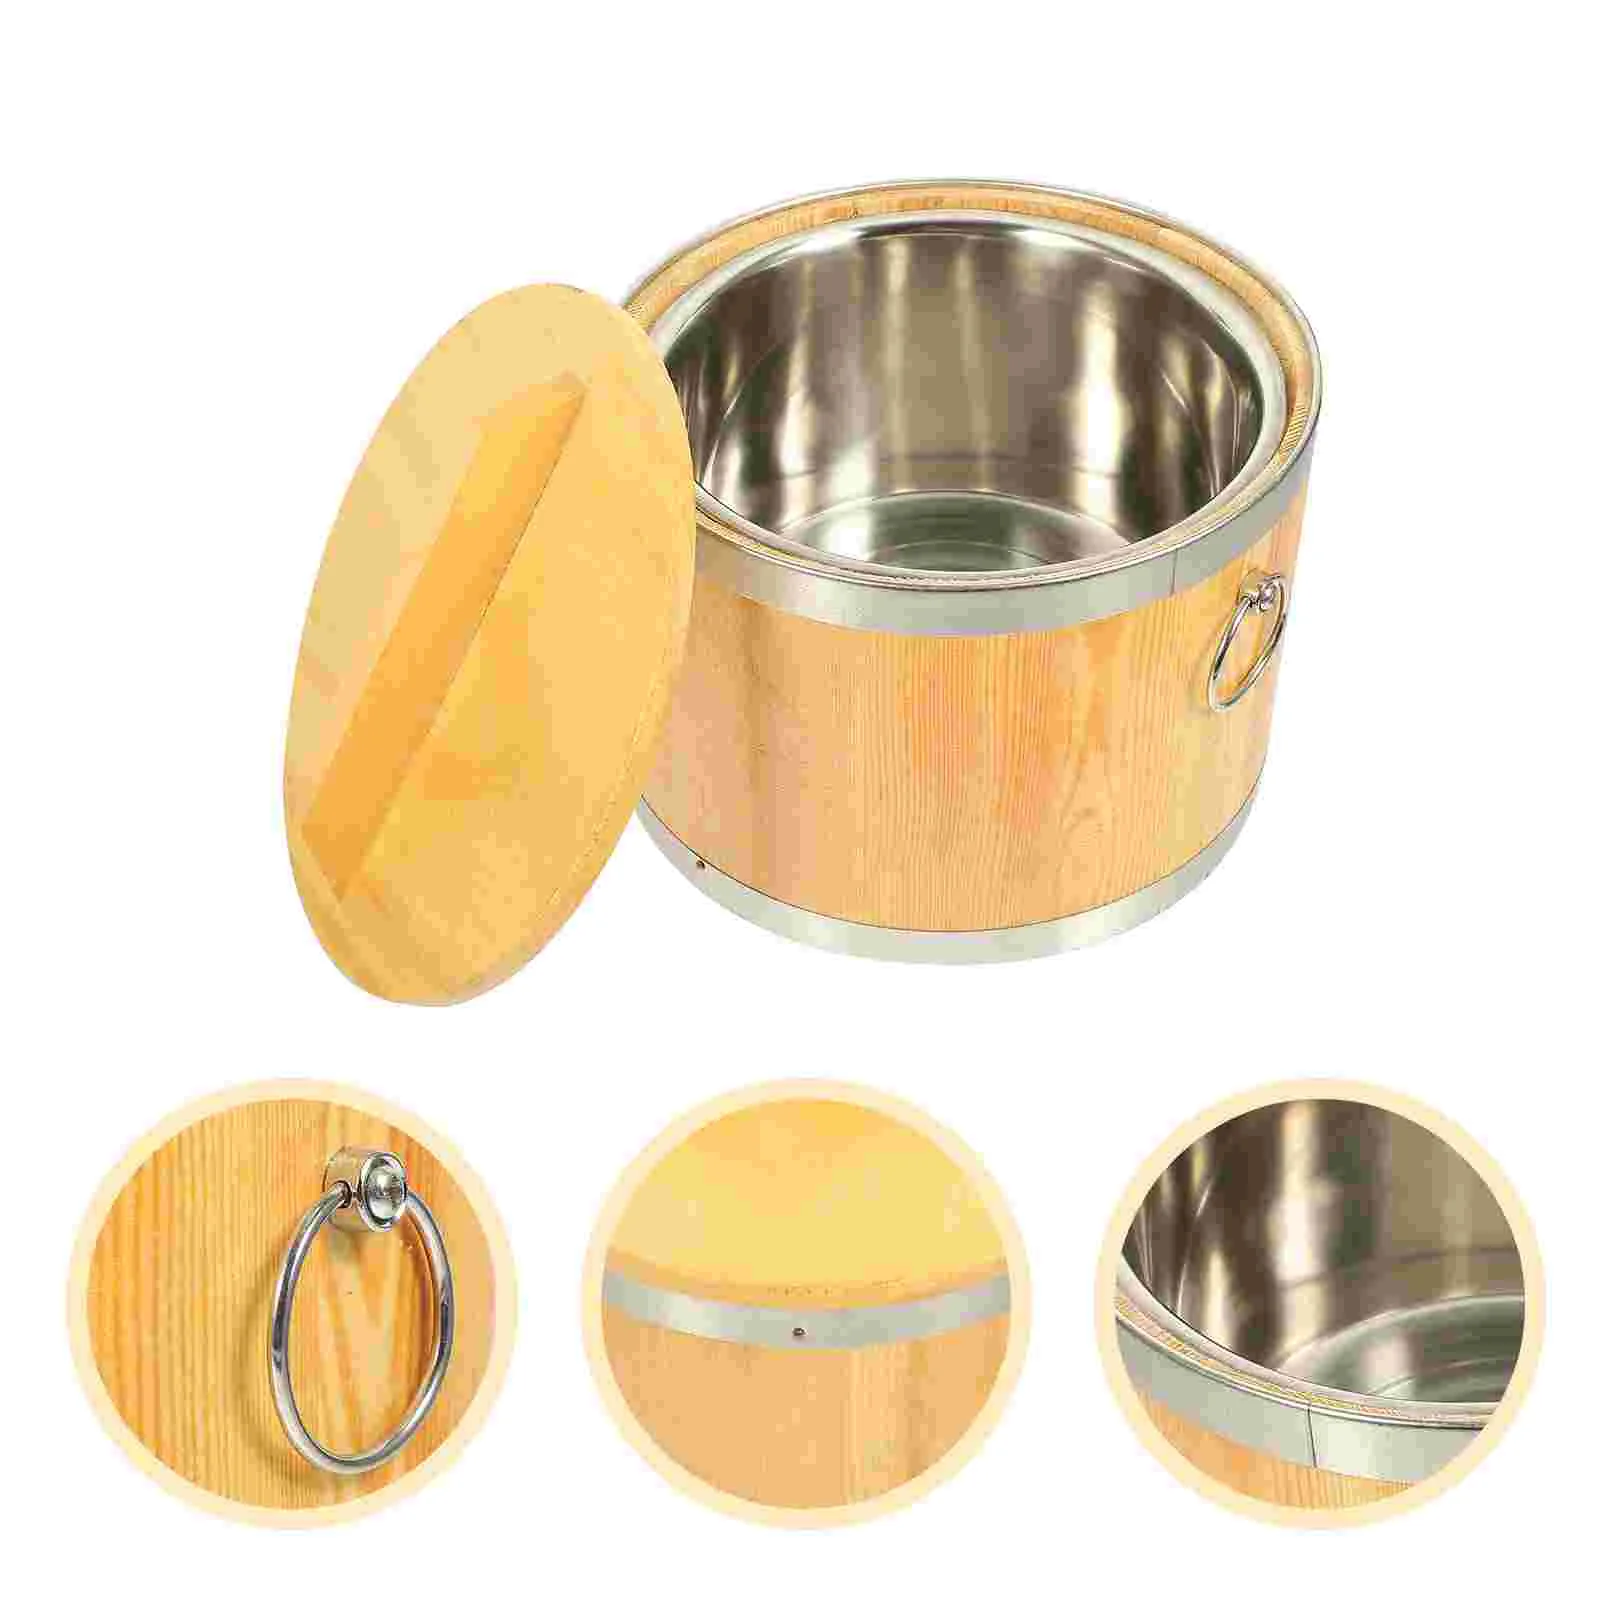 

Rice Container Sushi Barrel Beancurd Jelly Bucket Lidded Mixing Tub Display Bowl Serving Wood Cooked Holder